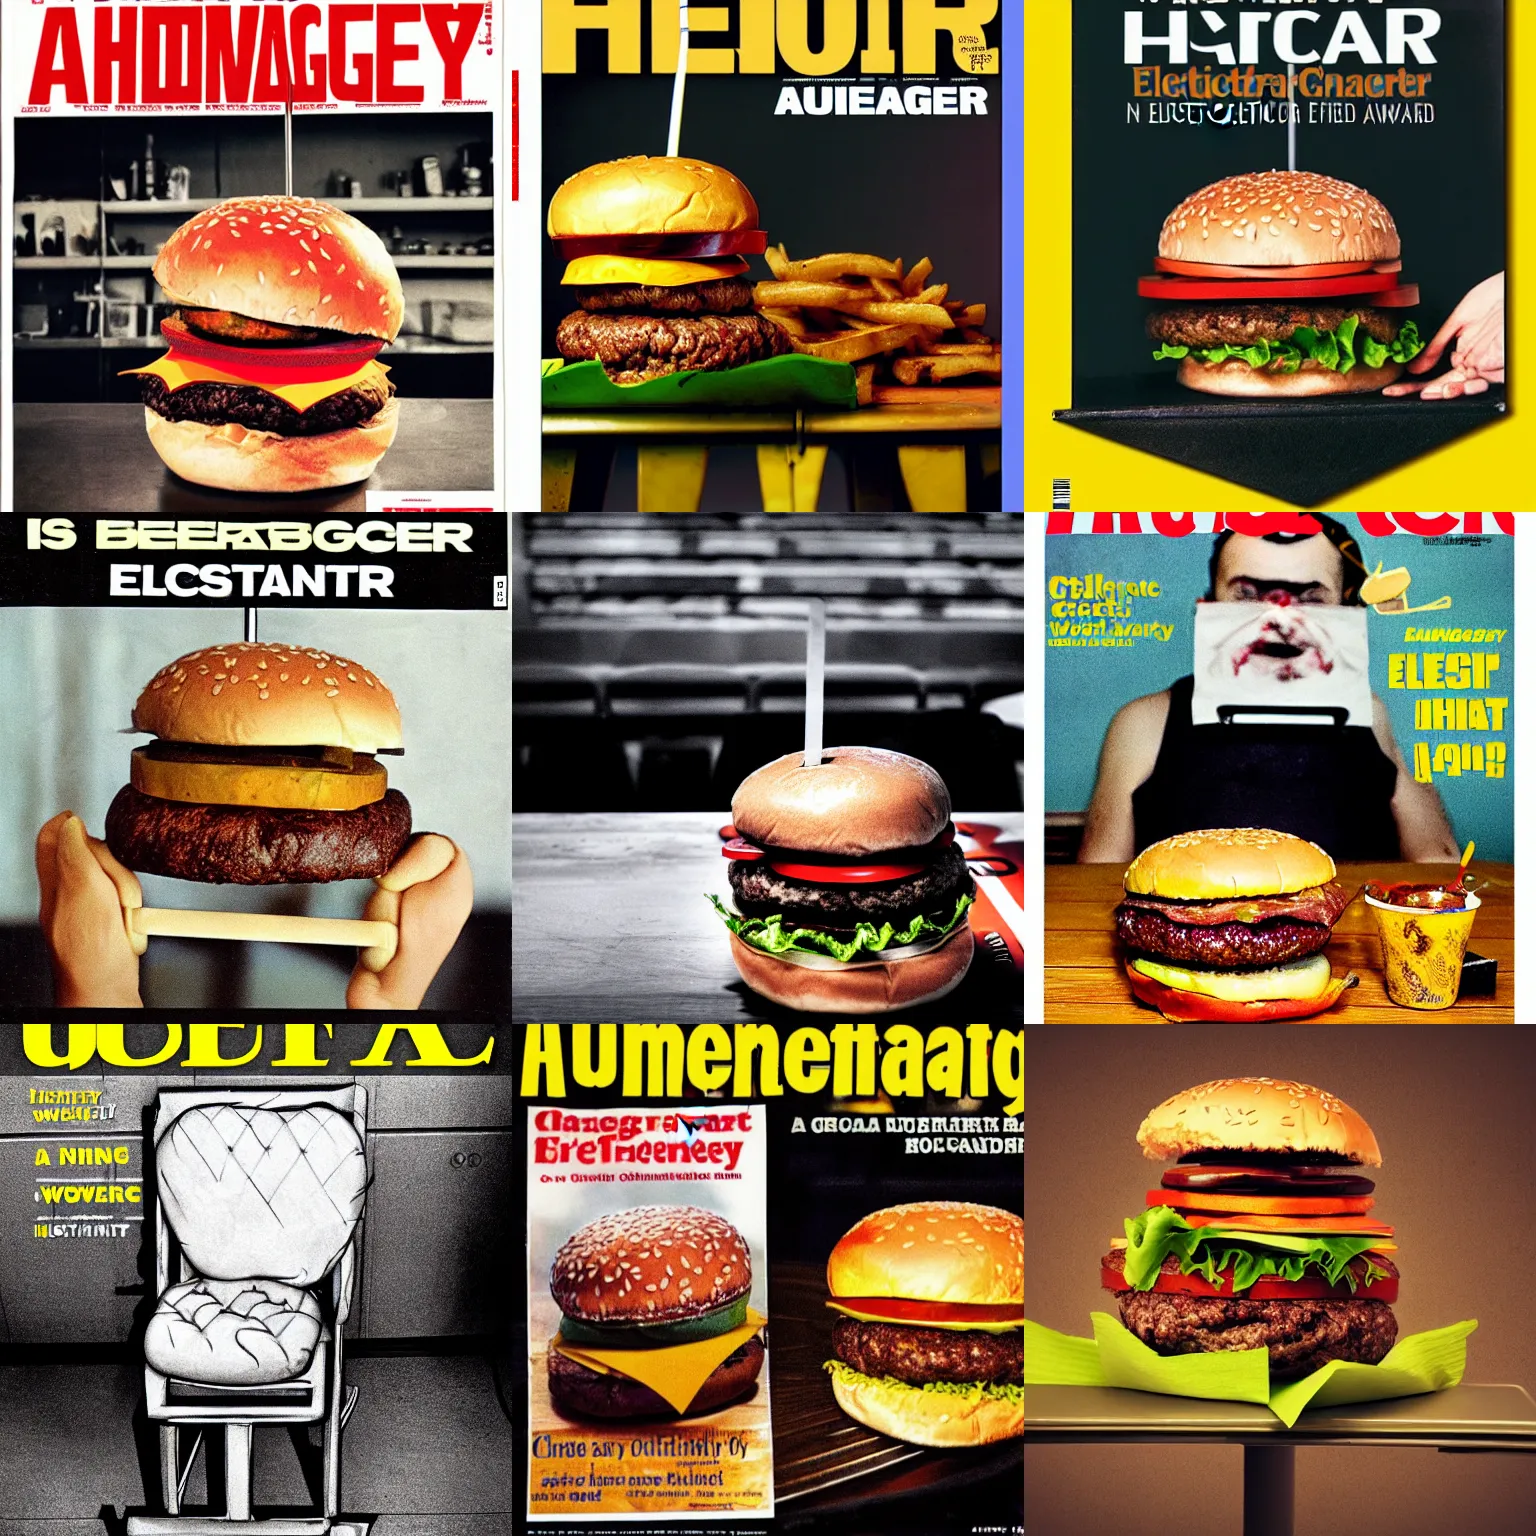 Prompt: a hamburger sitting on the electric chair, electric chair, award winning photograph, magazine cover, social commentary